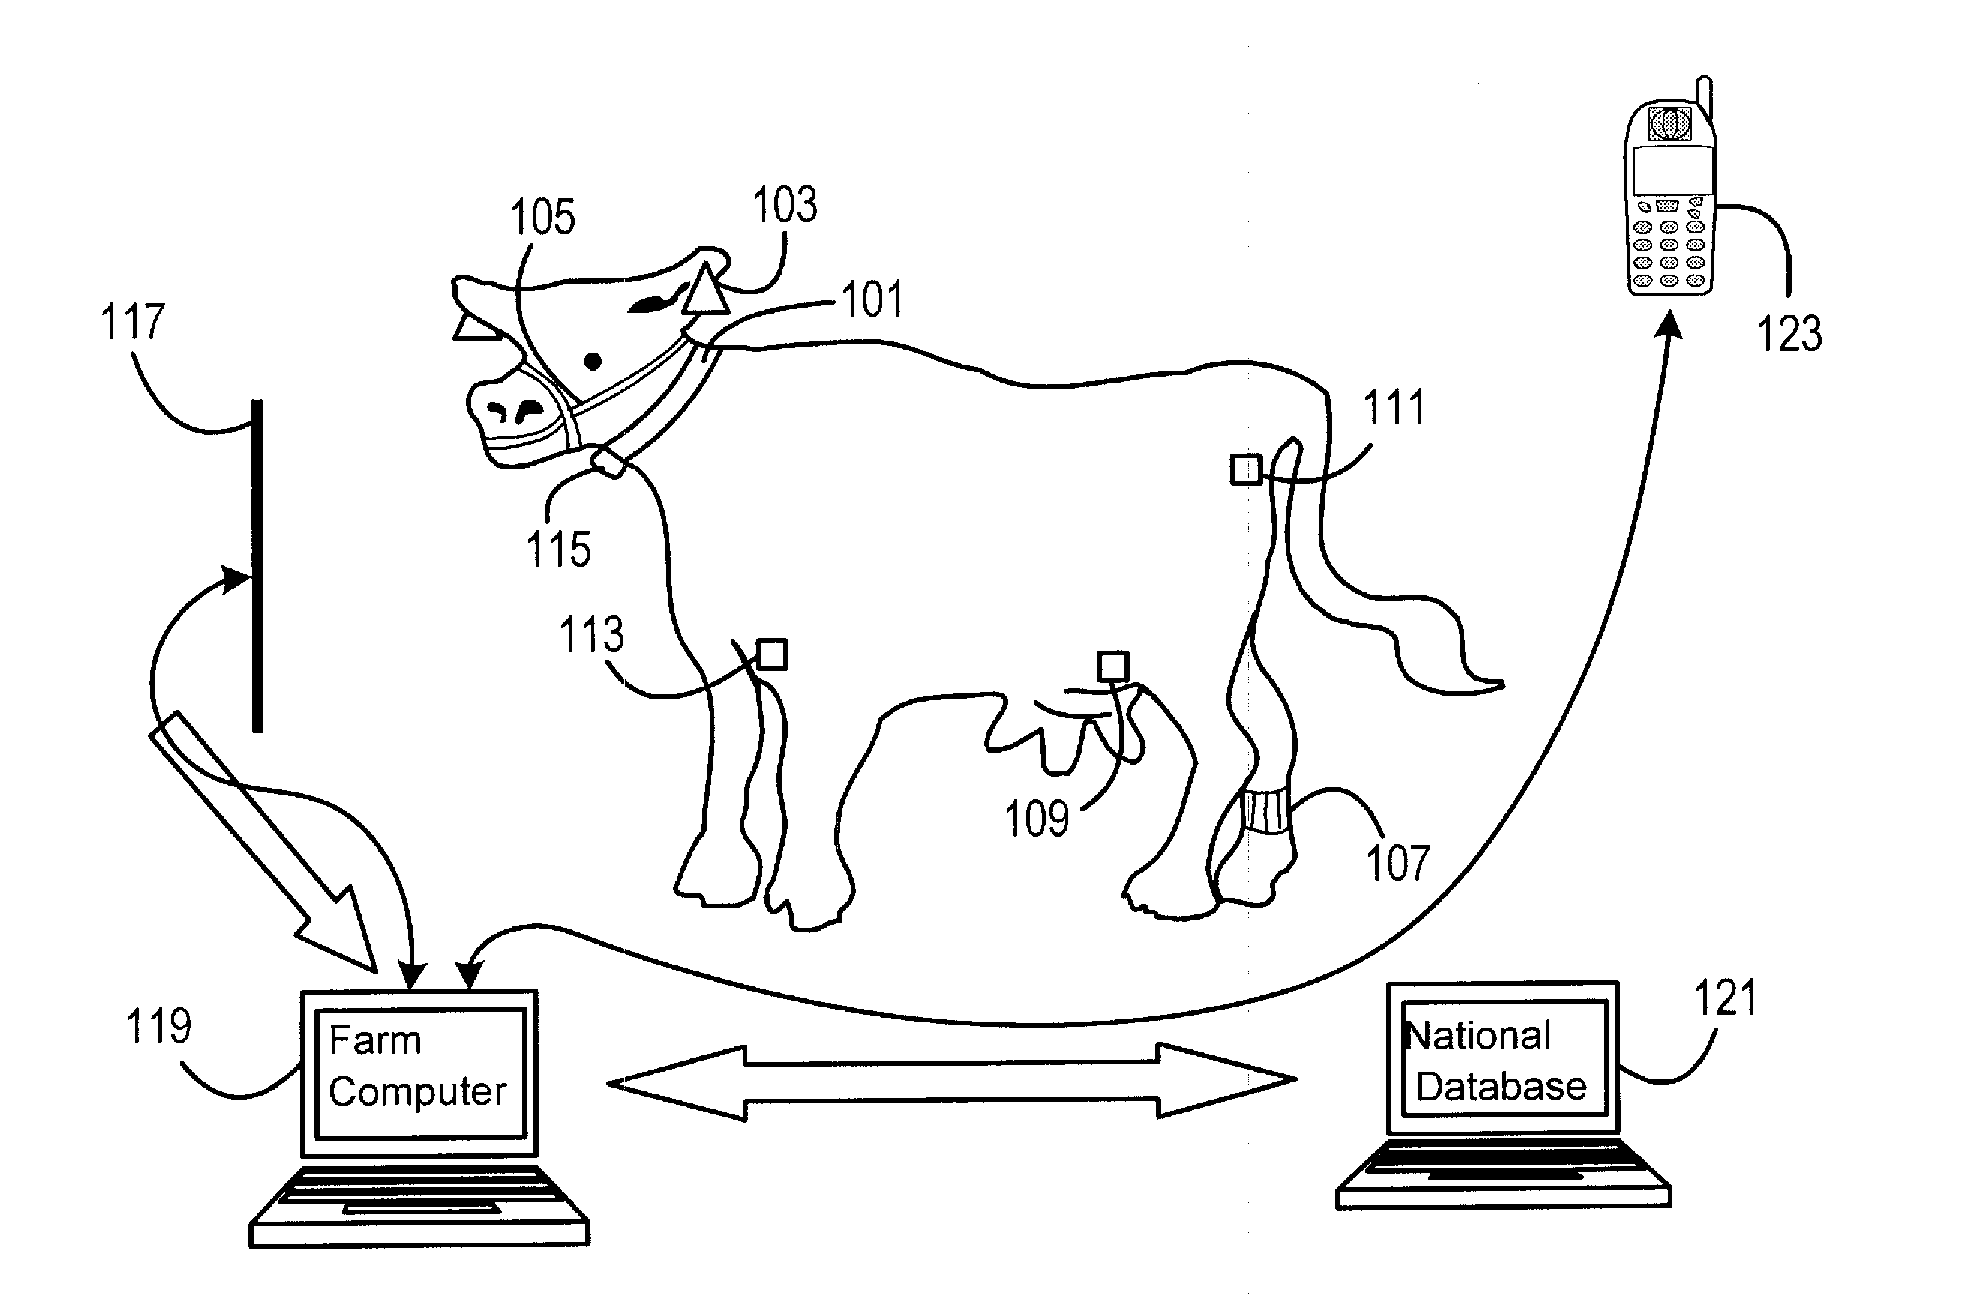 Method and System for Monitoring the Condition of Livestock